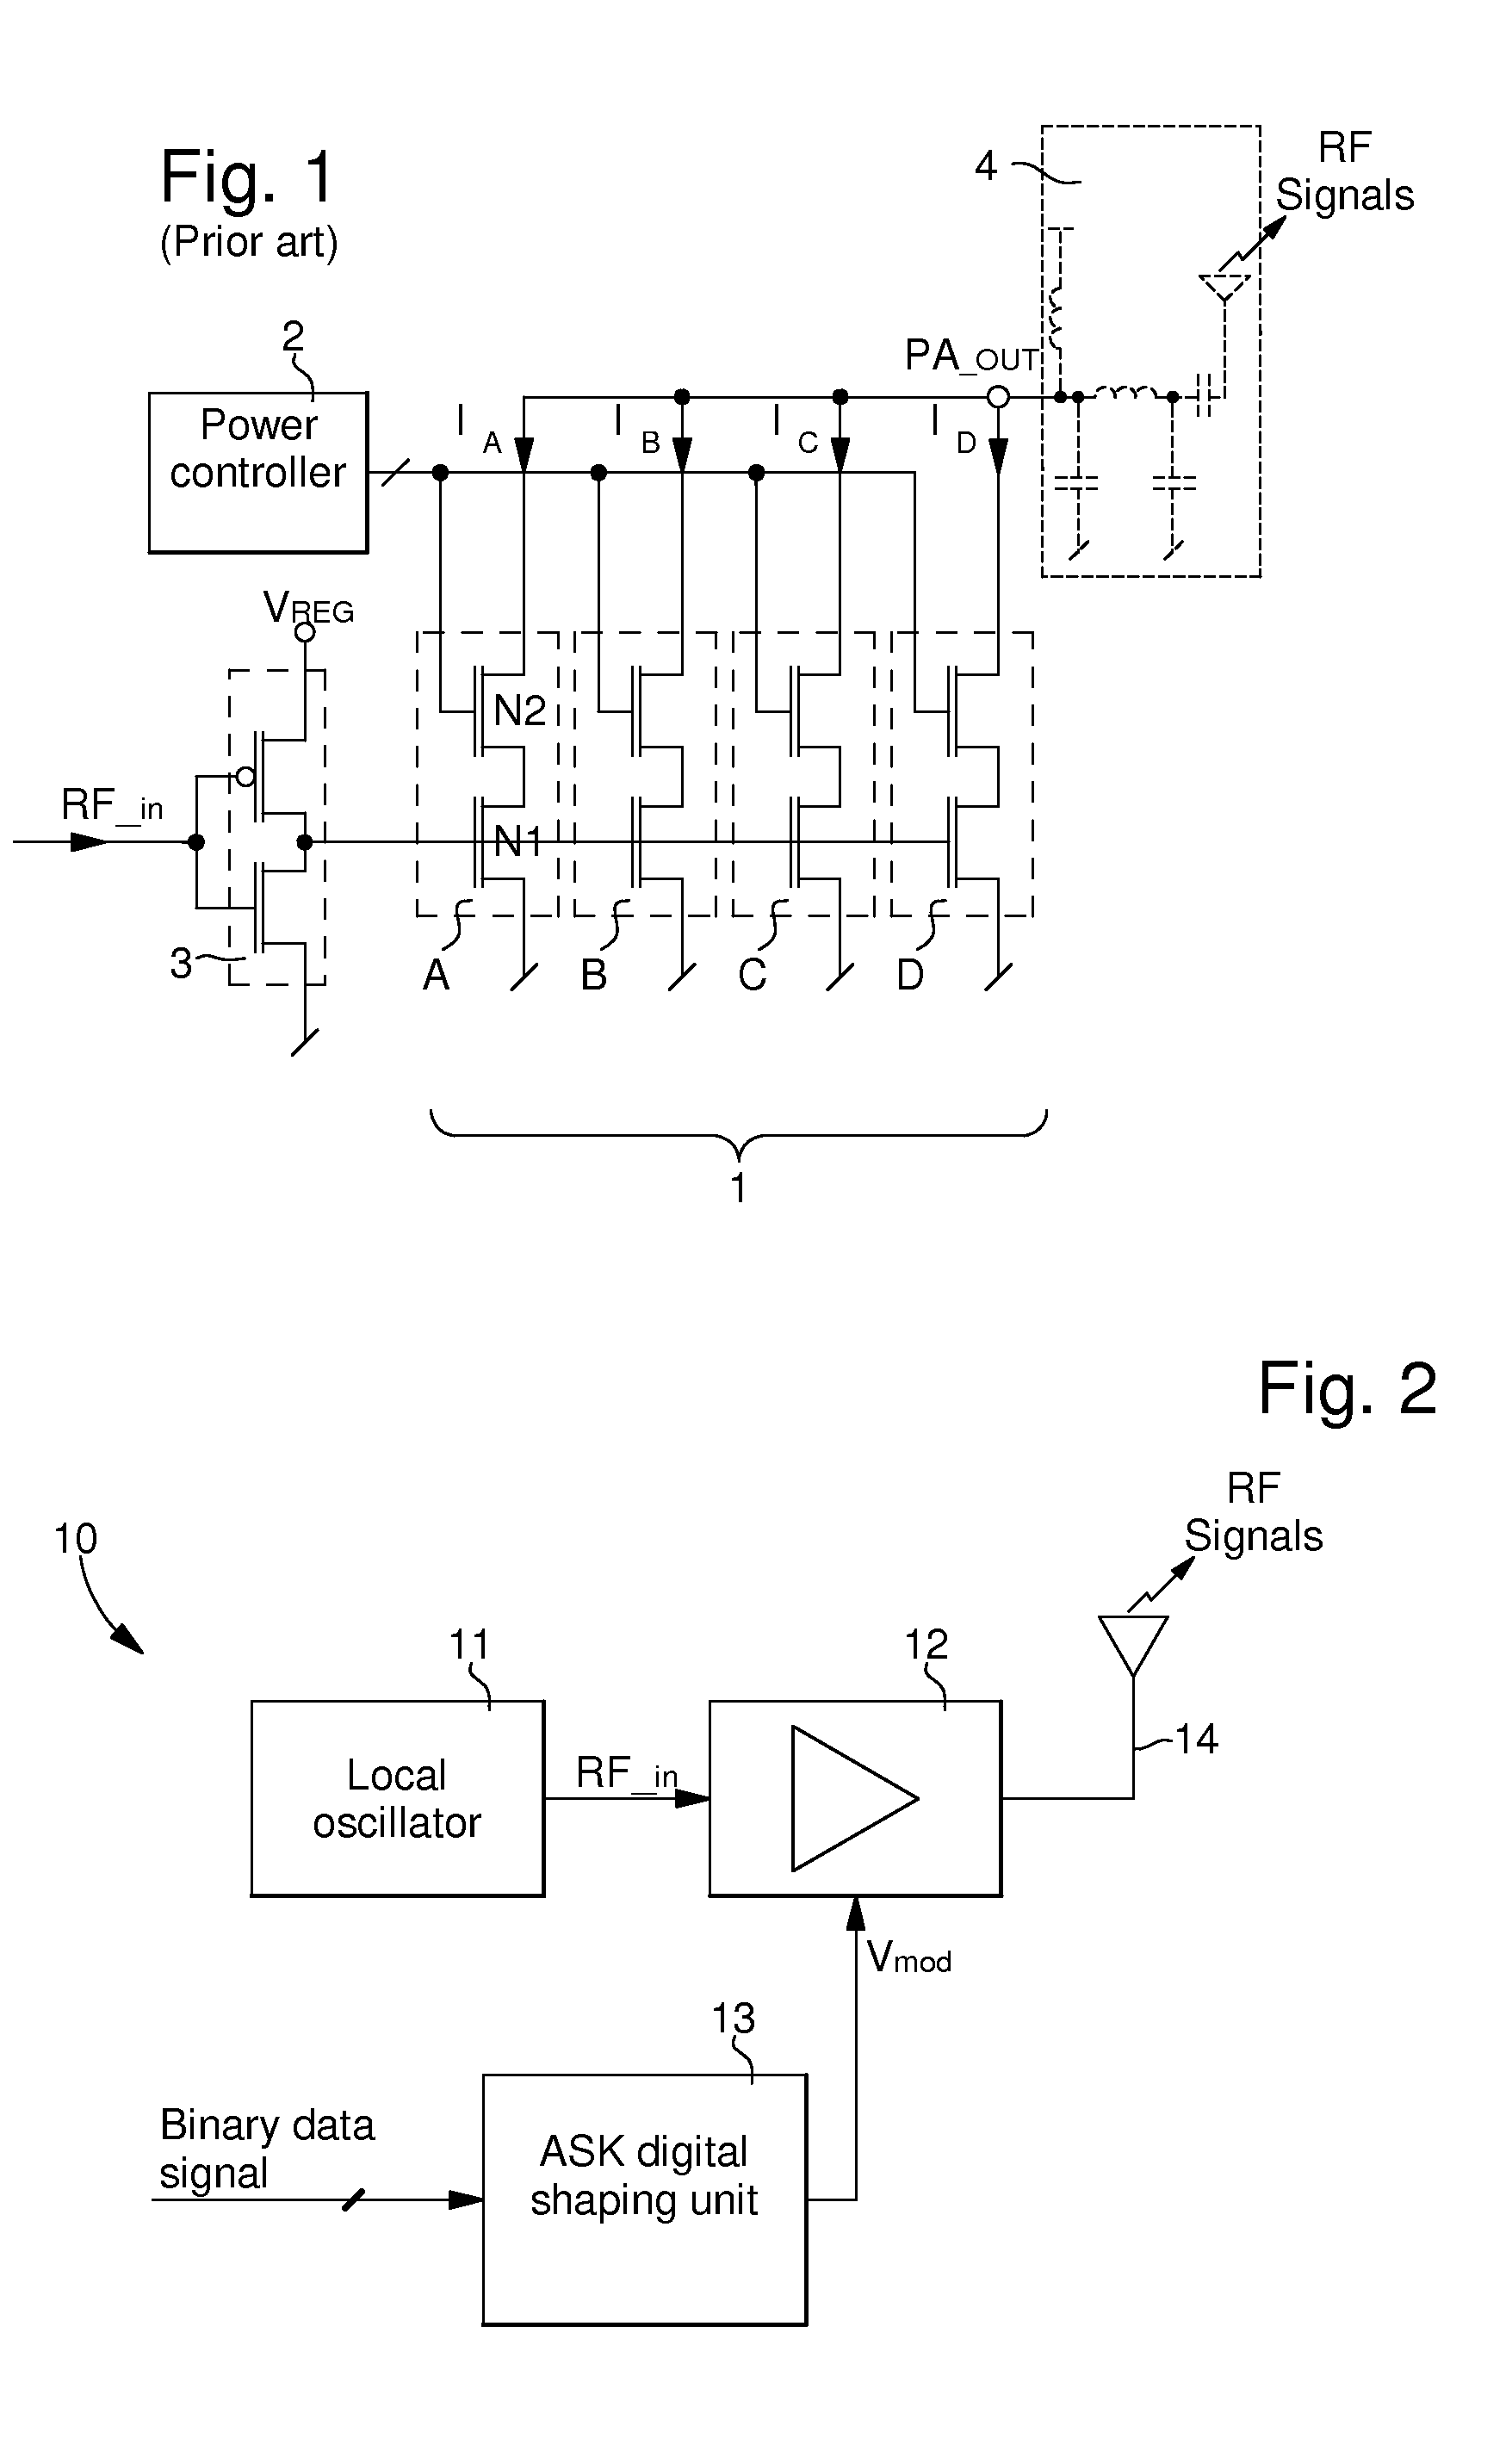 Circuit for transmitting ask RF signals with data signal edge adaptation